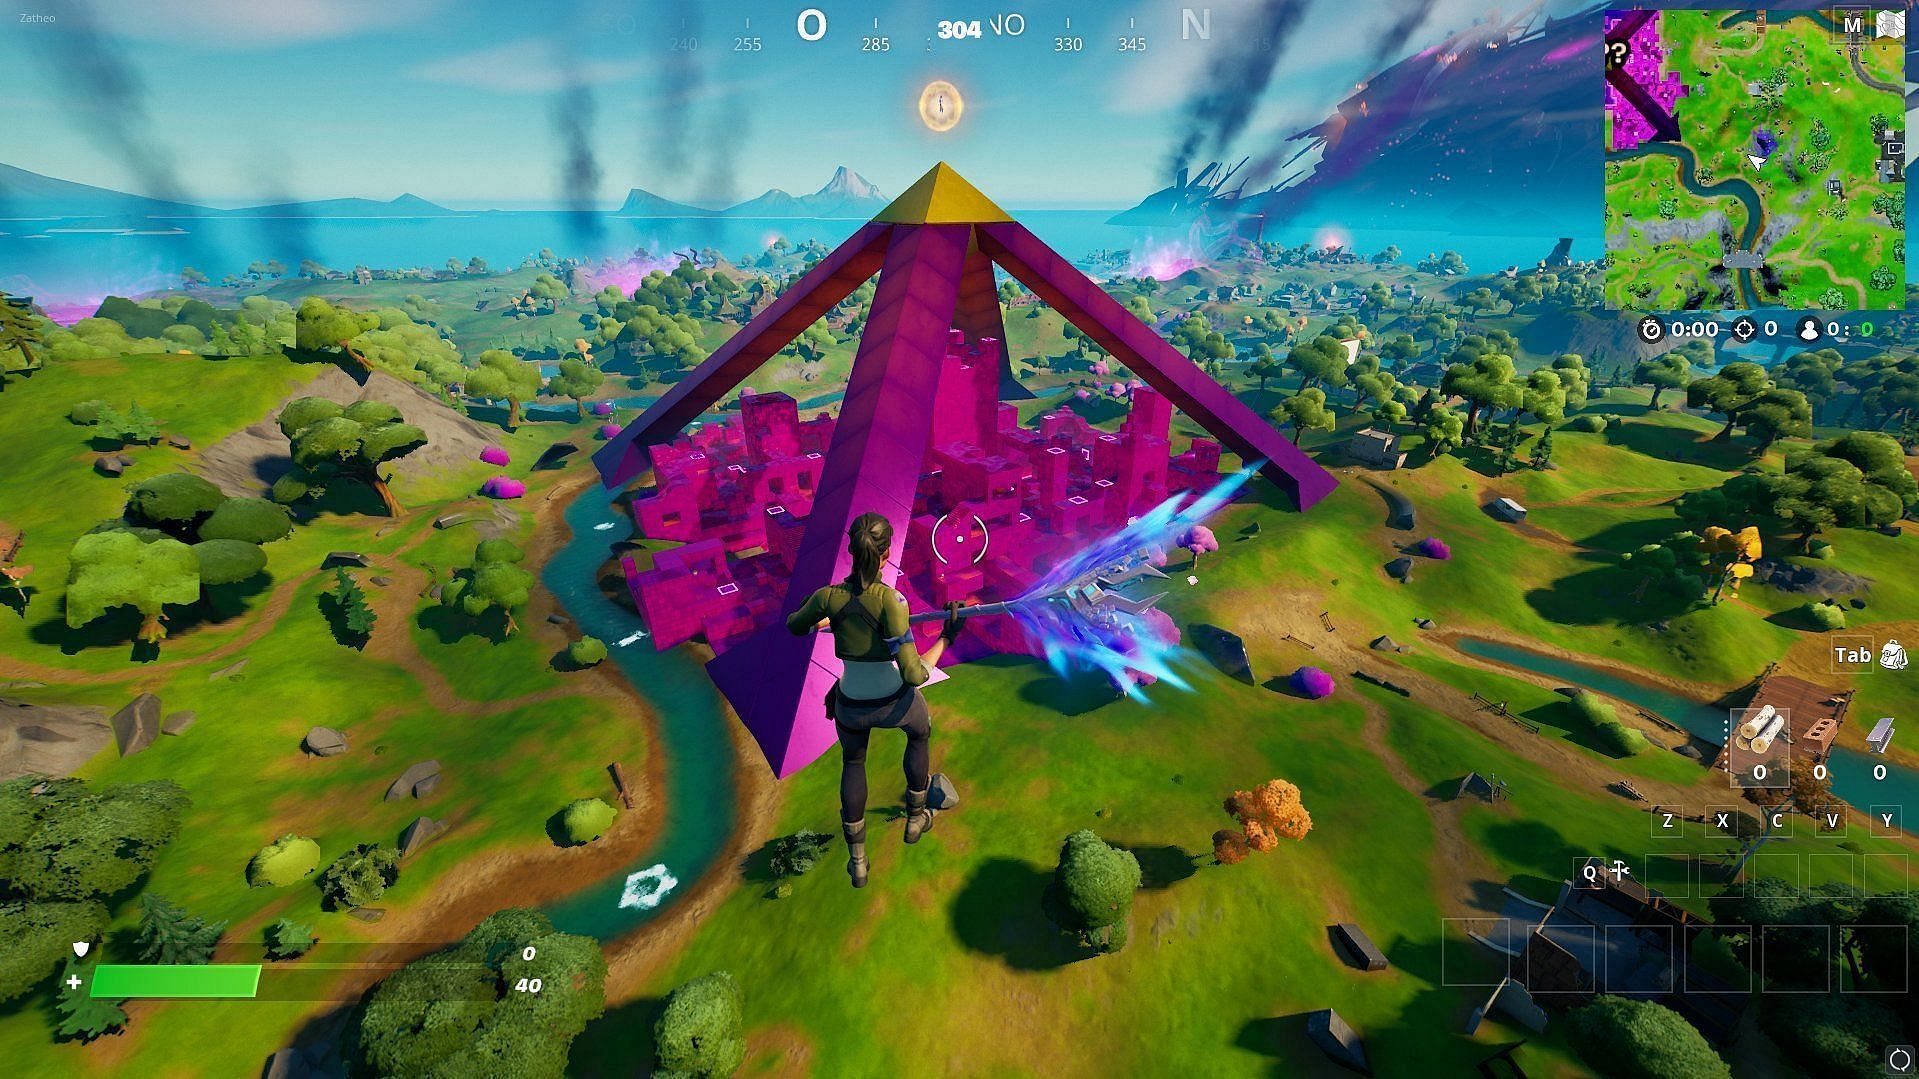 The Pyramid structure might lead to total annihilation (Image via HYPEX)